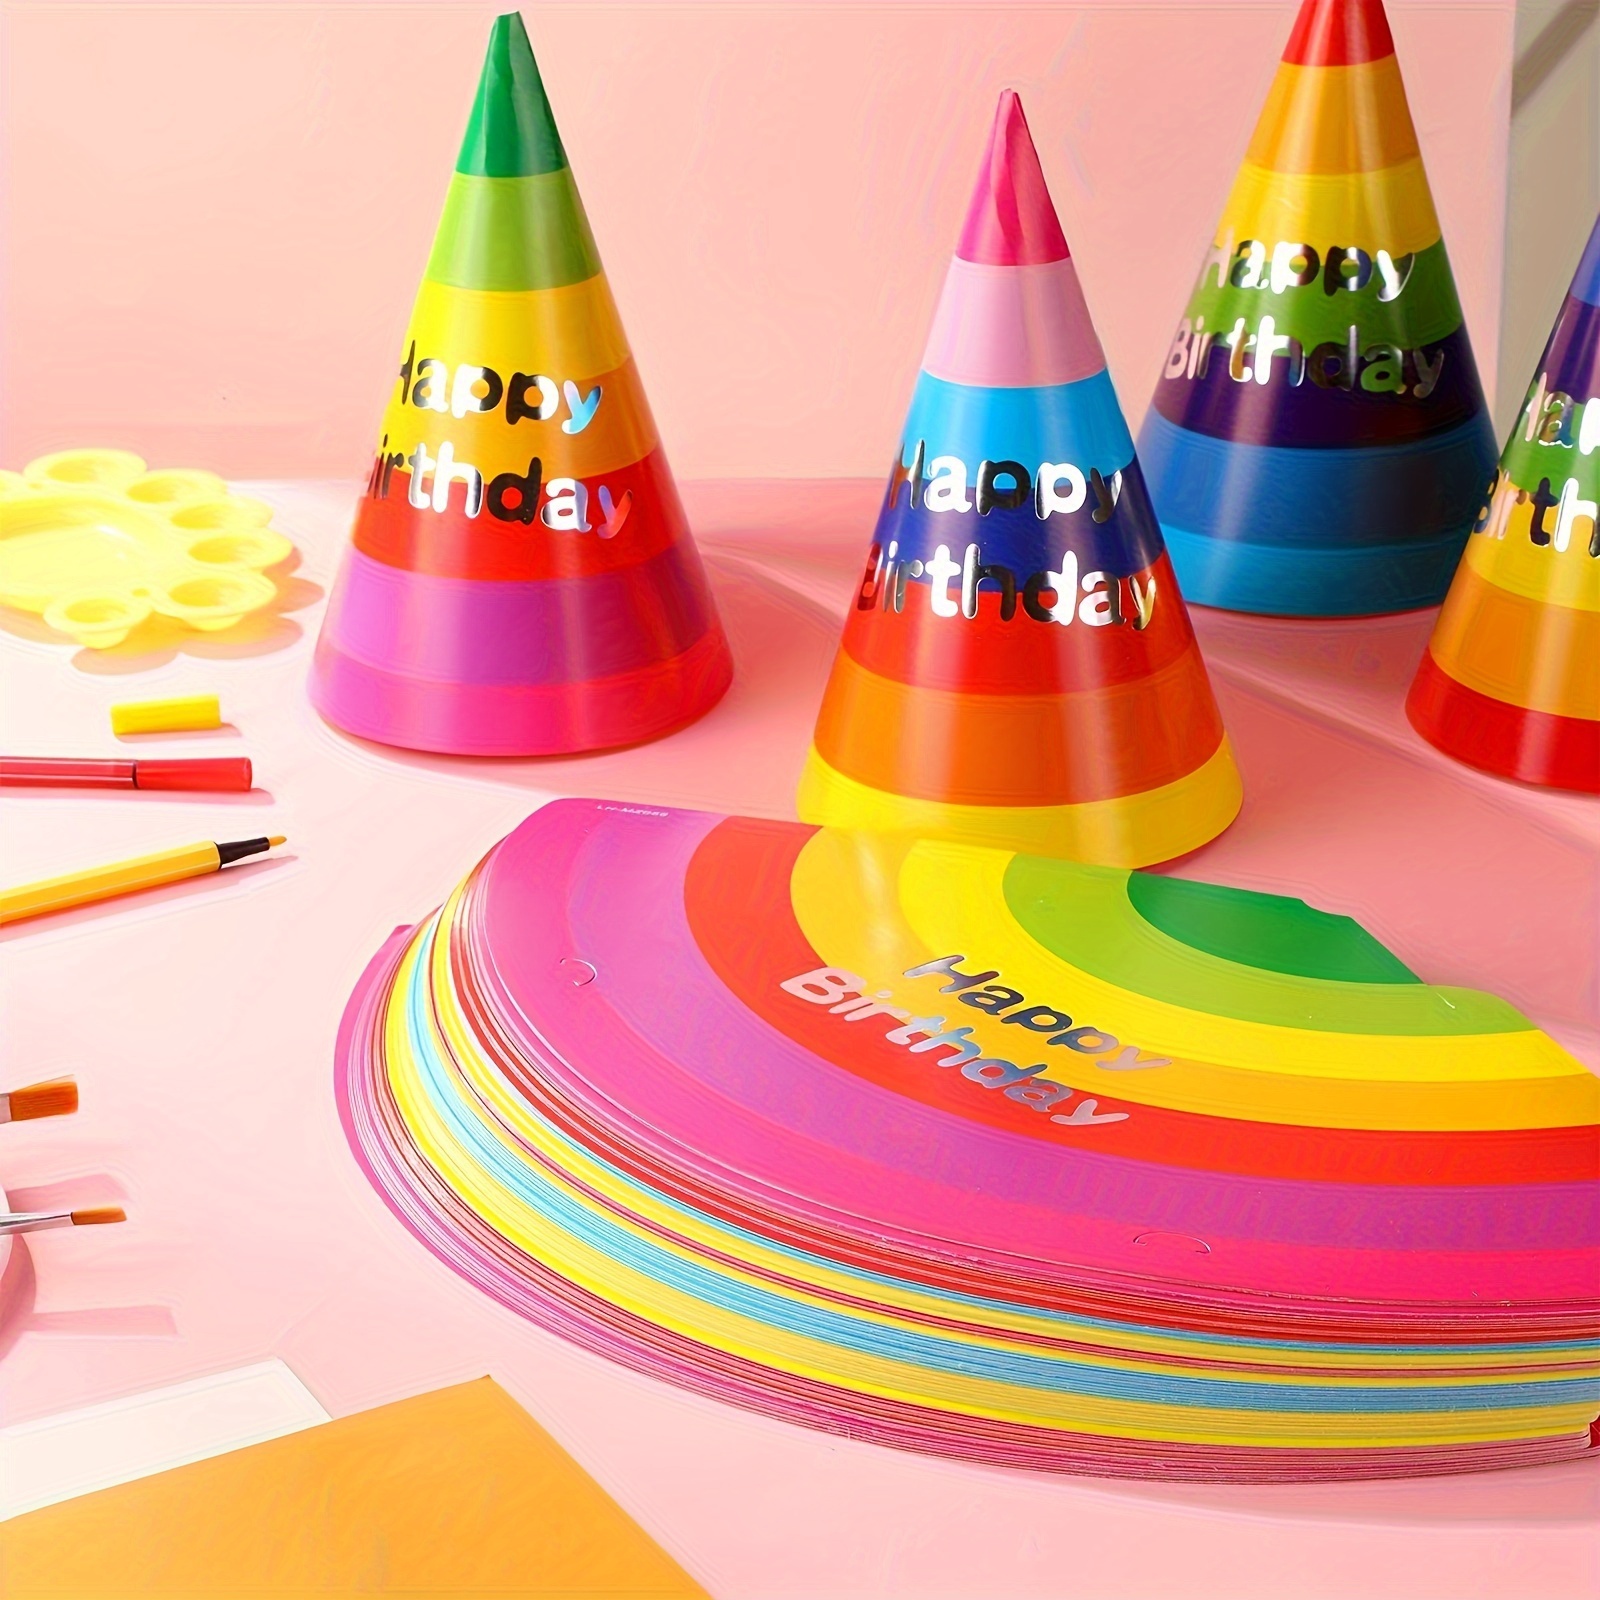 

20pcs, Rainbow Birthday Party Hats Colorful Birthday Cone Hats With Happy Birthday Banner For Boys Girls Adults Birthday Party